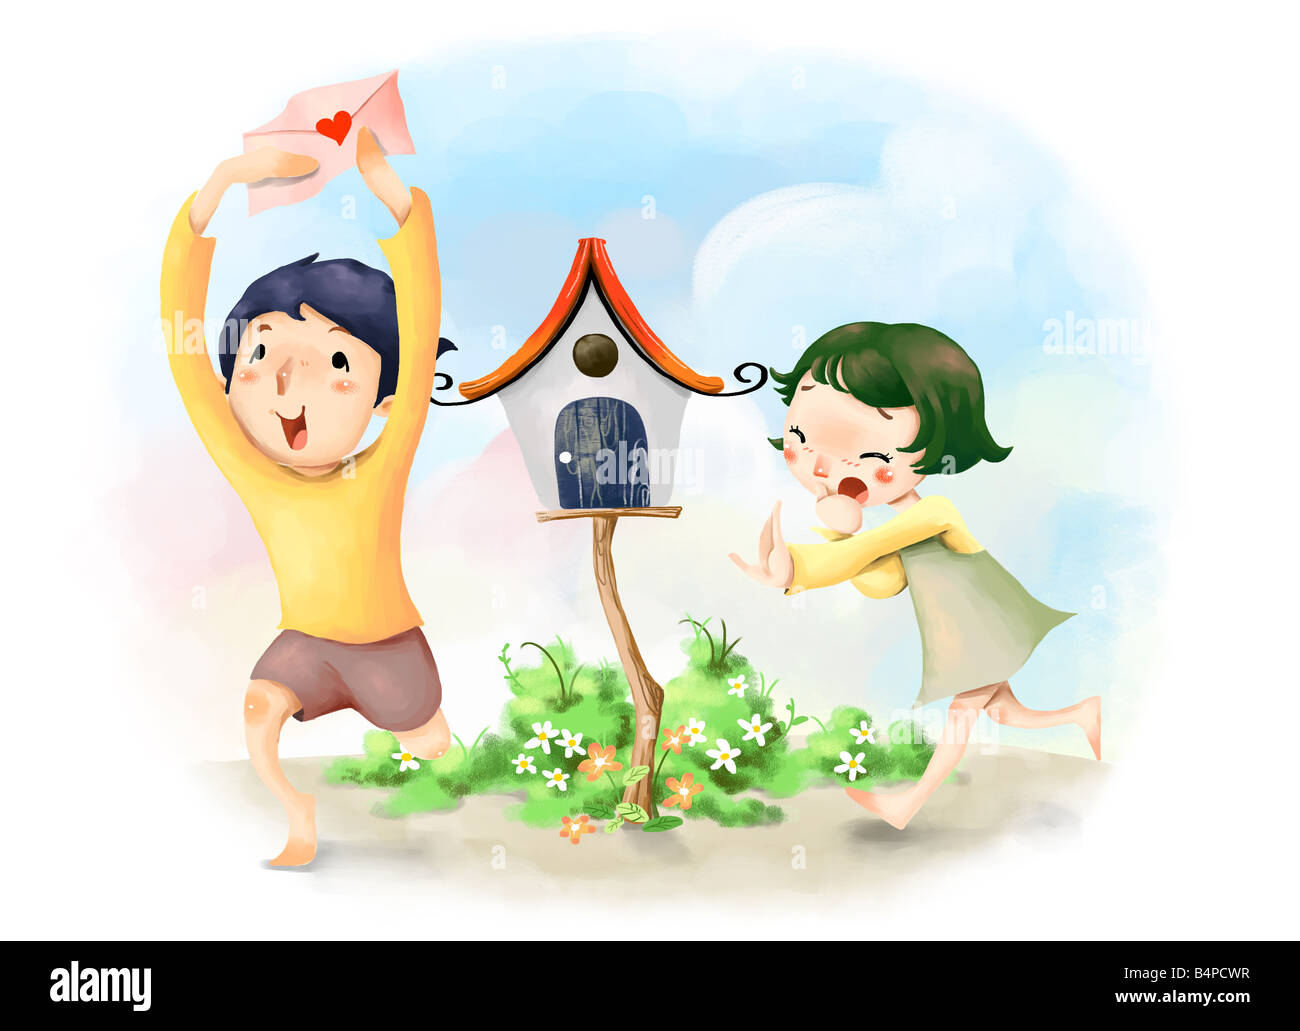 Representation of boy running with envelope with girl following him Stock Photo